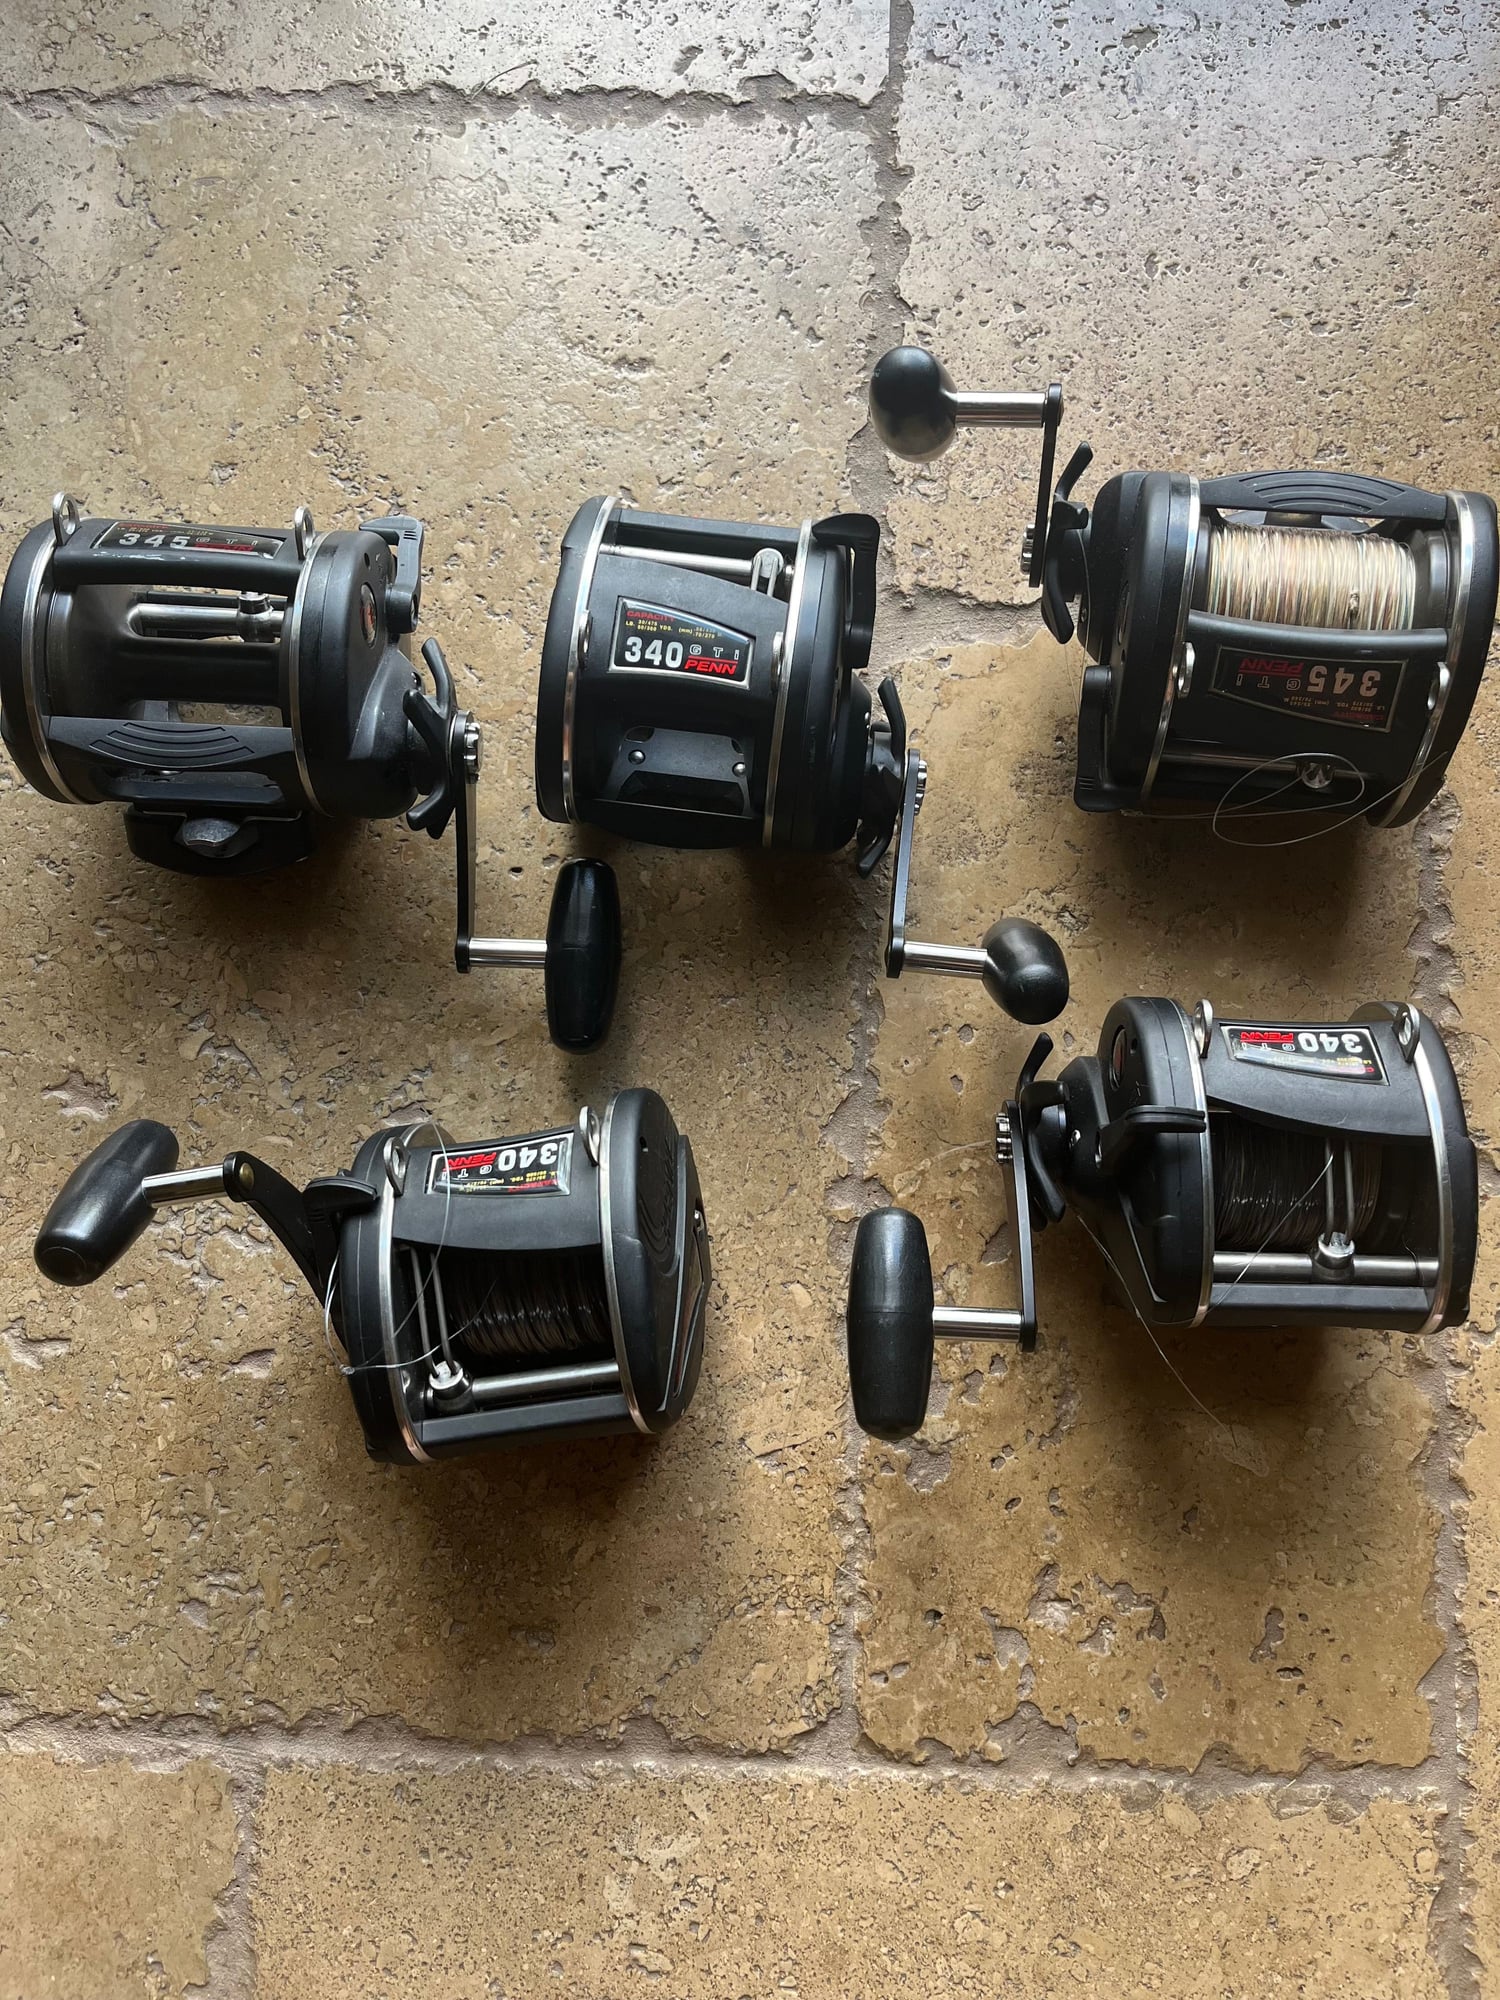 Penn 340 & 345 GTI reels - The Hull Truth - Boating and Fishing Forum